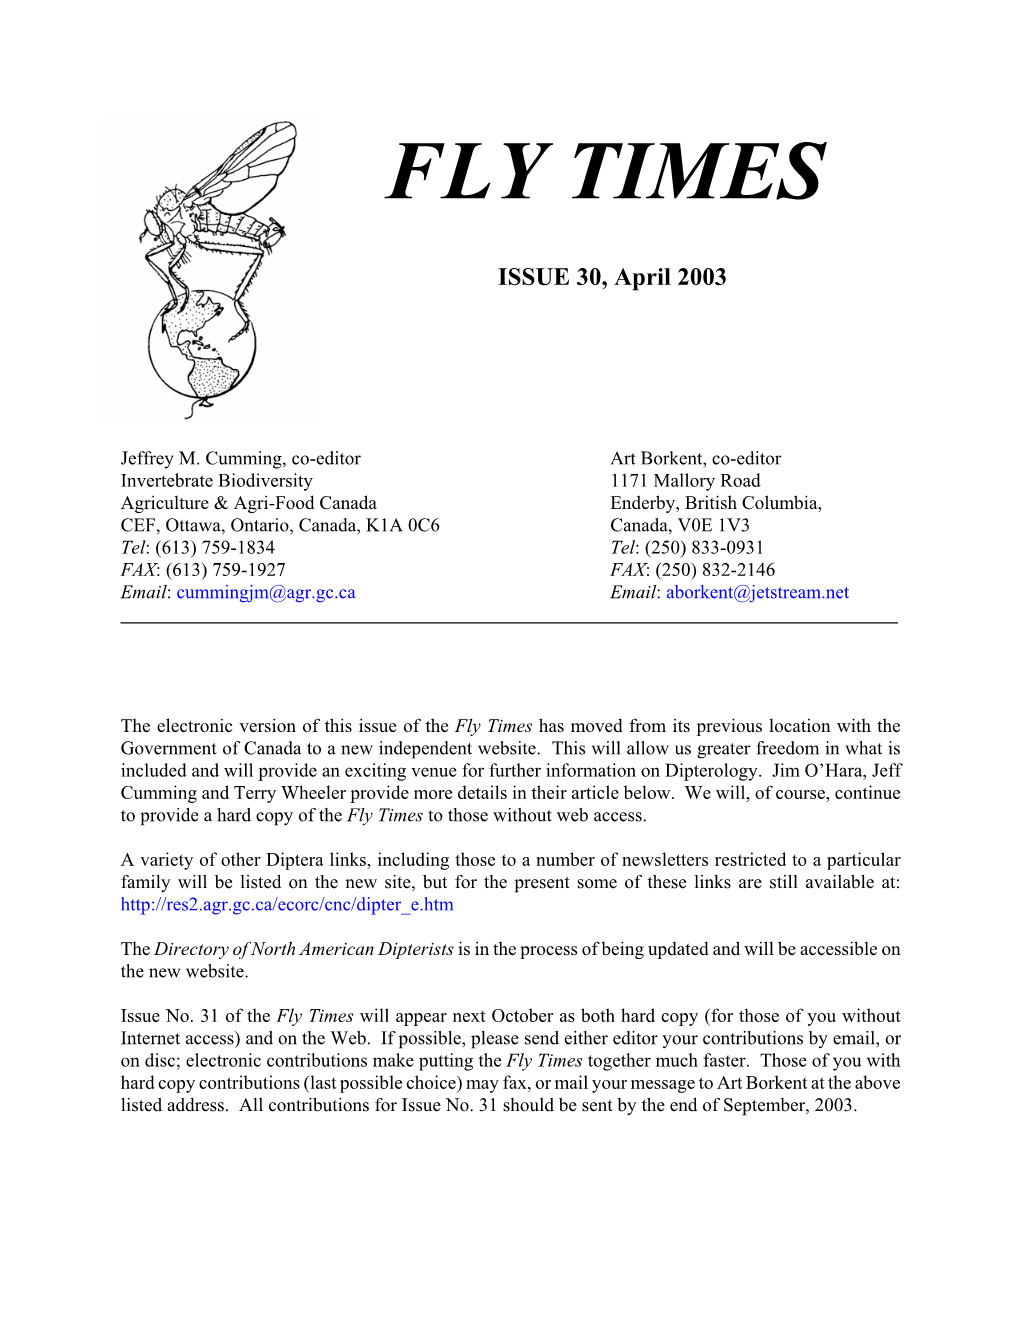 Fly Times Issue 30, April 2003